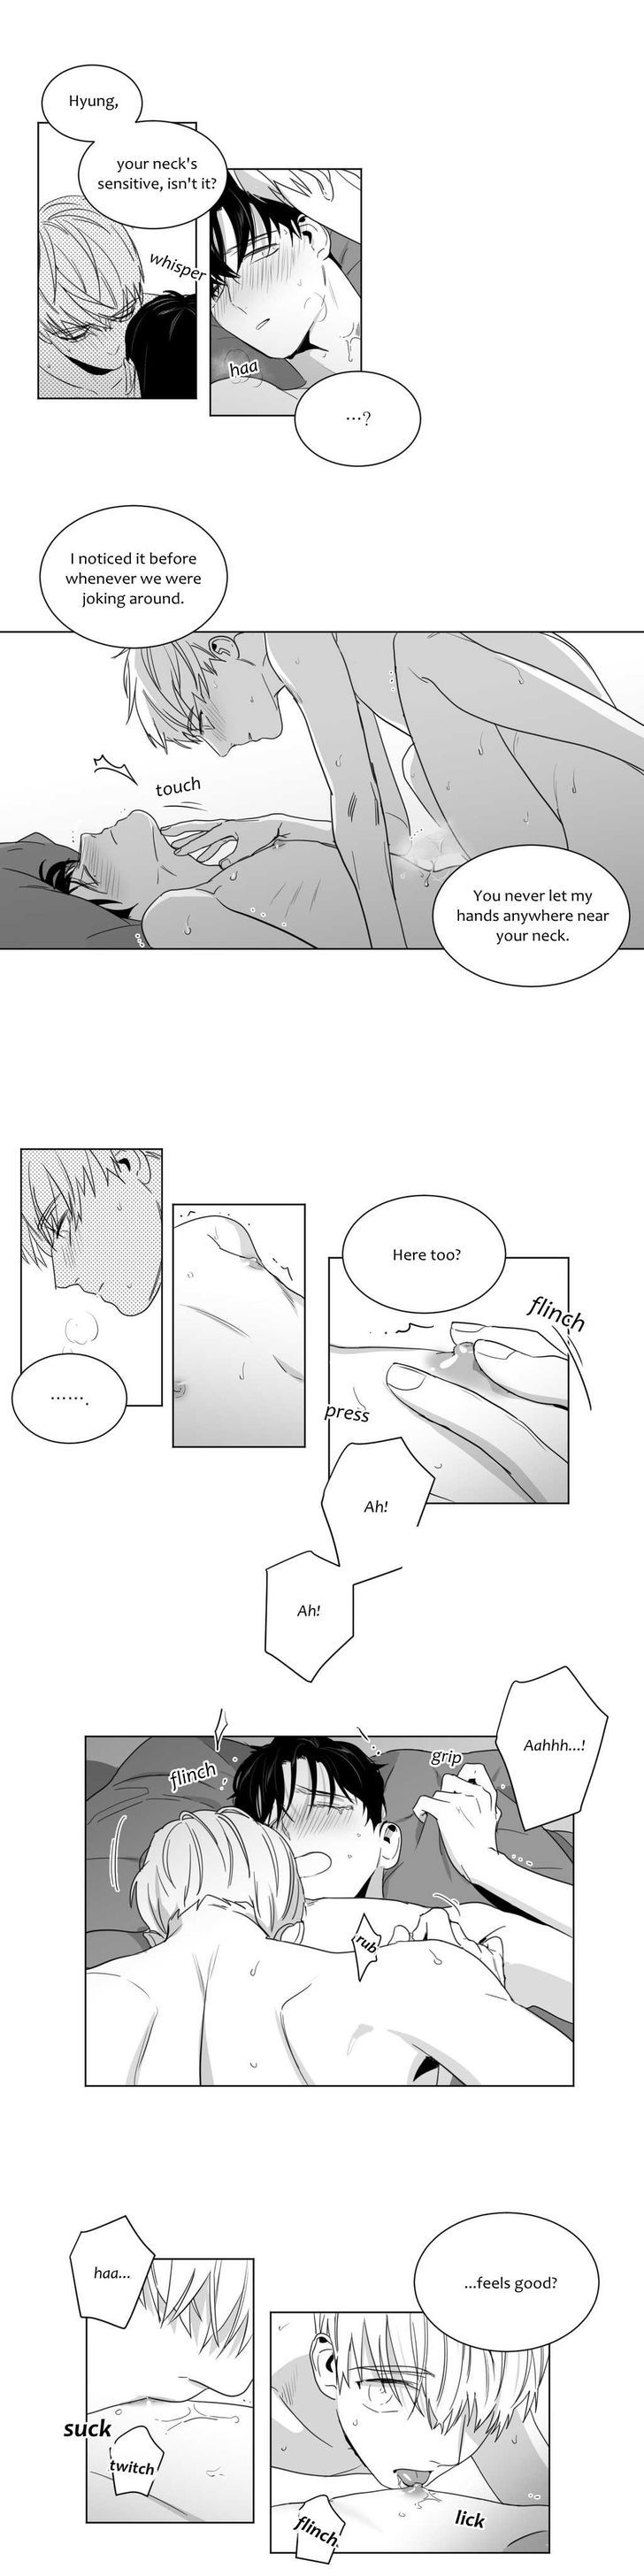 Lover Boy (Lezhin) Chapter 016 page 10